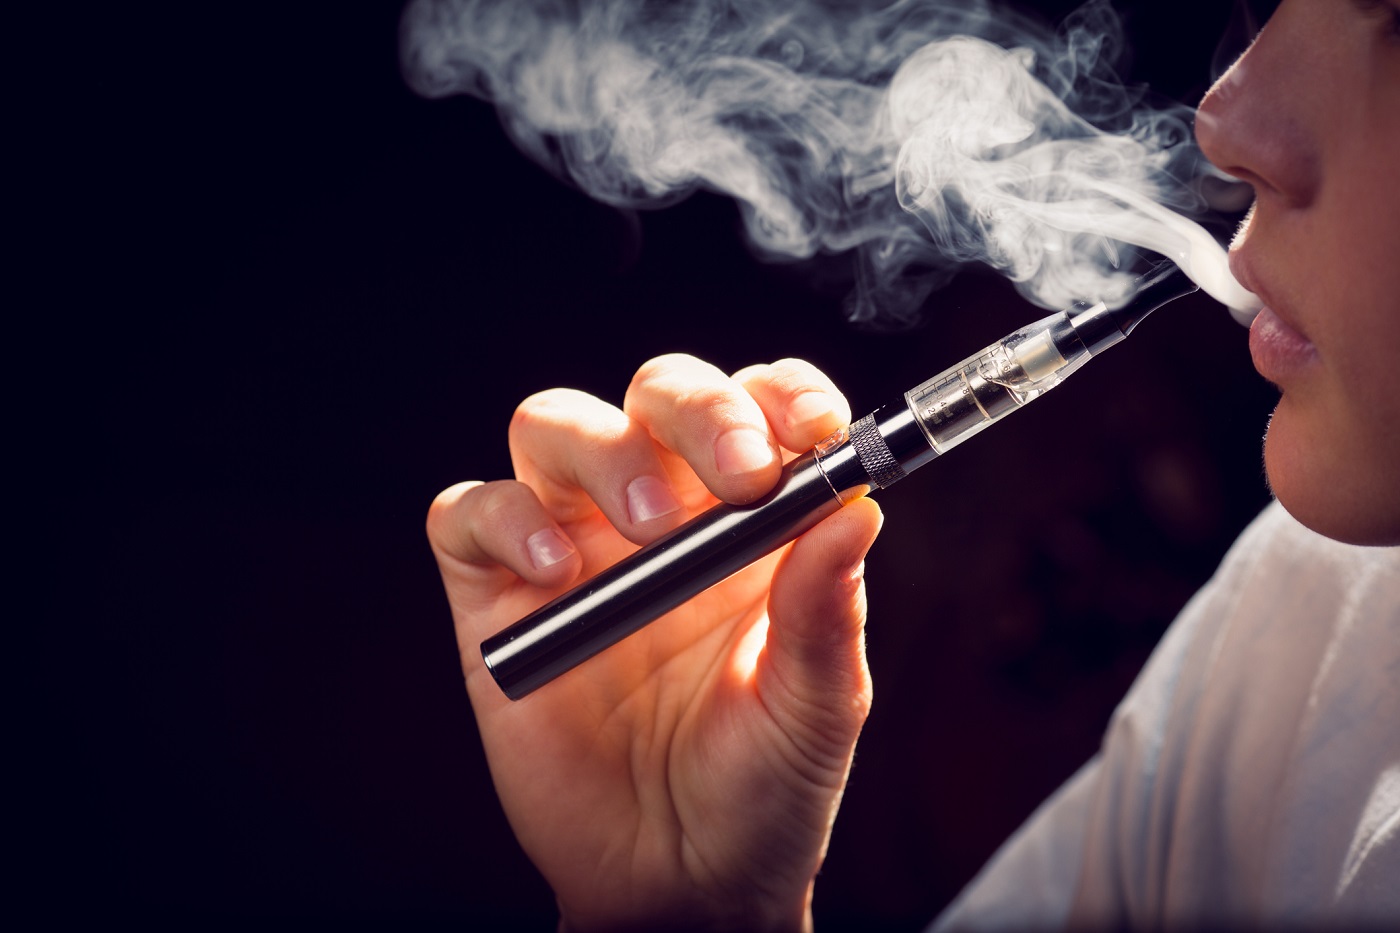 Clearing up some myths around e-cigarettes - Public health matters